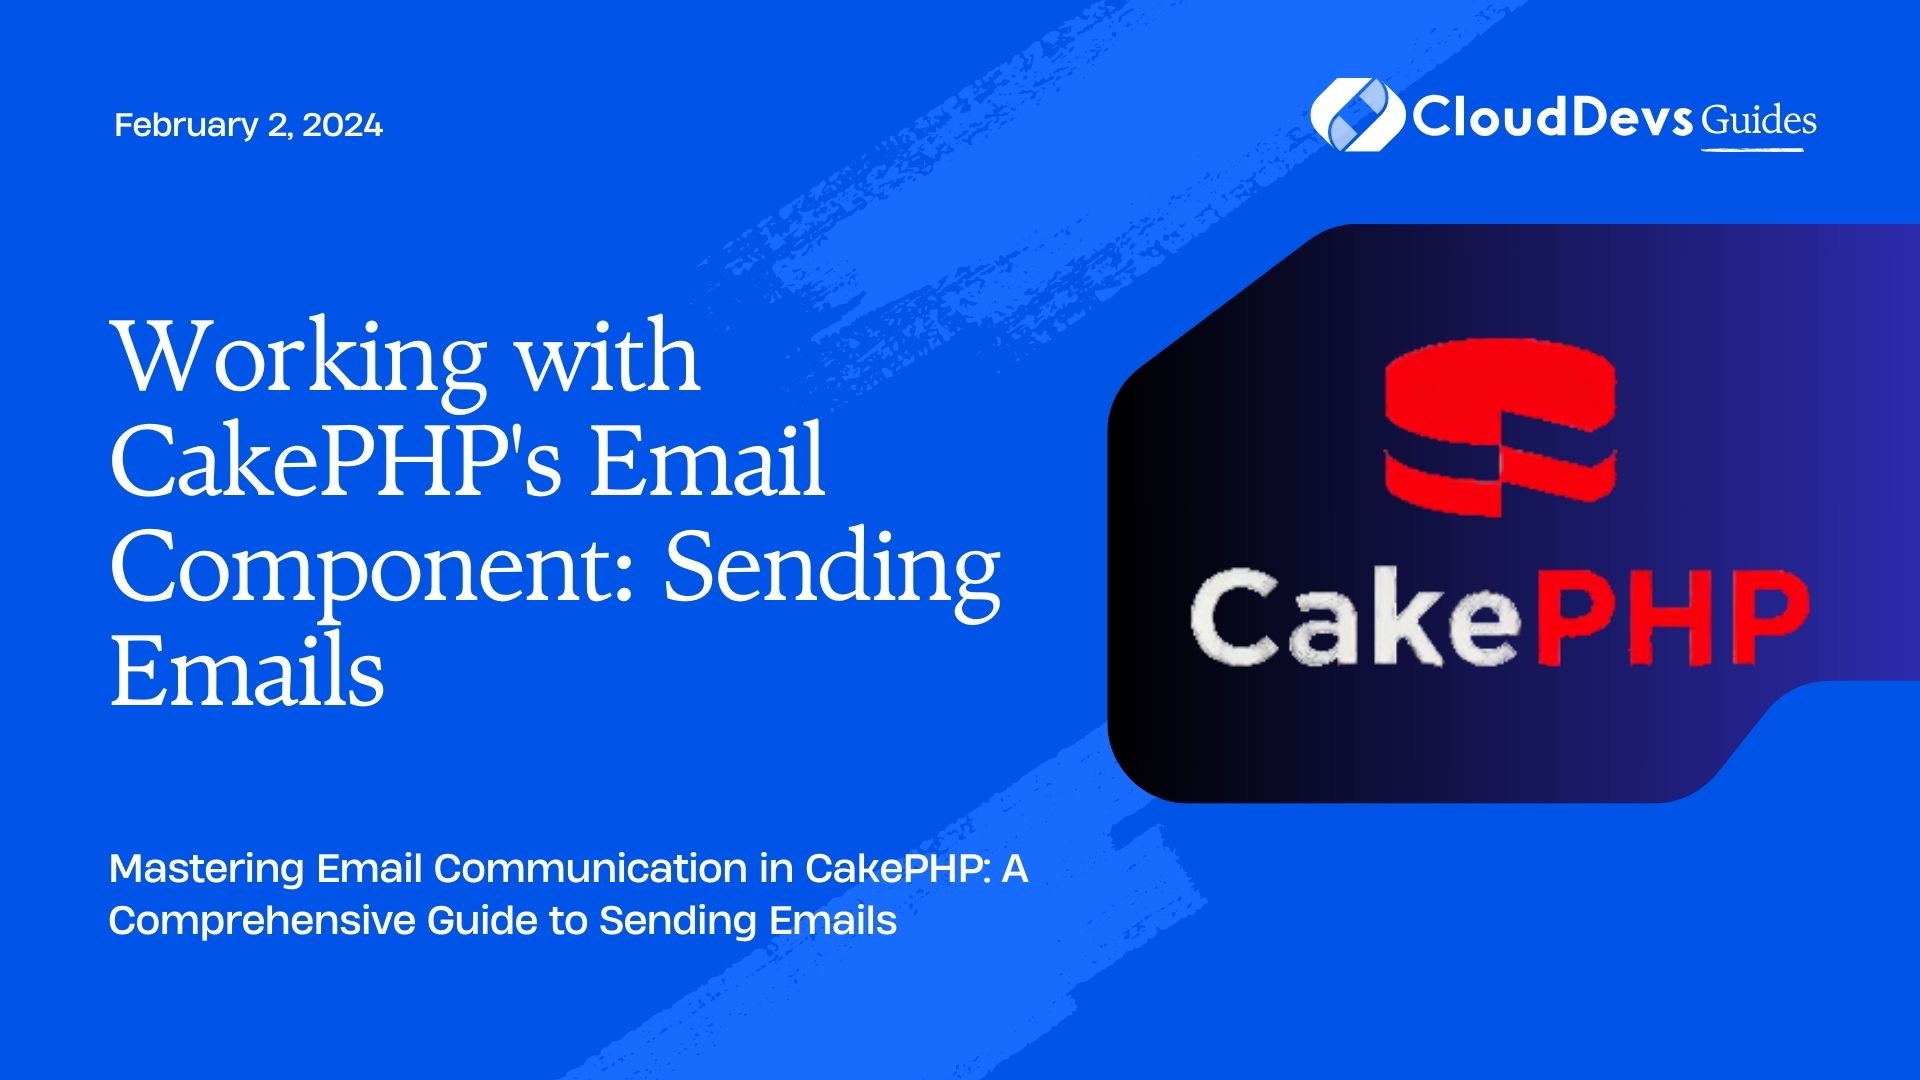 Working with CakePHP's Email Component: Sending Emails